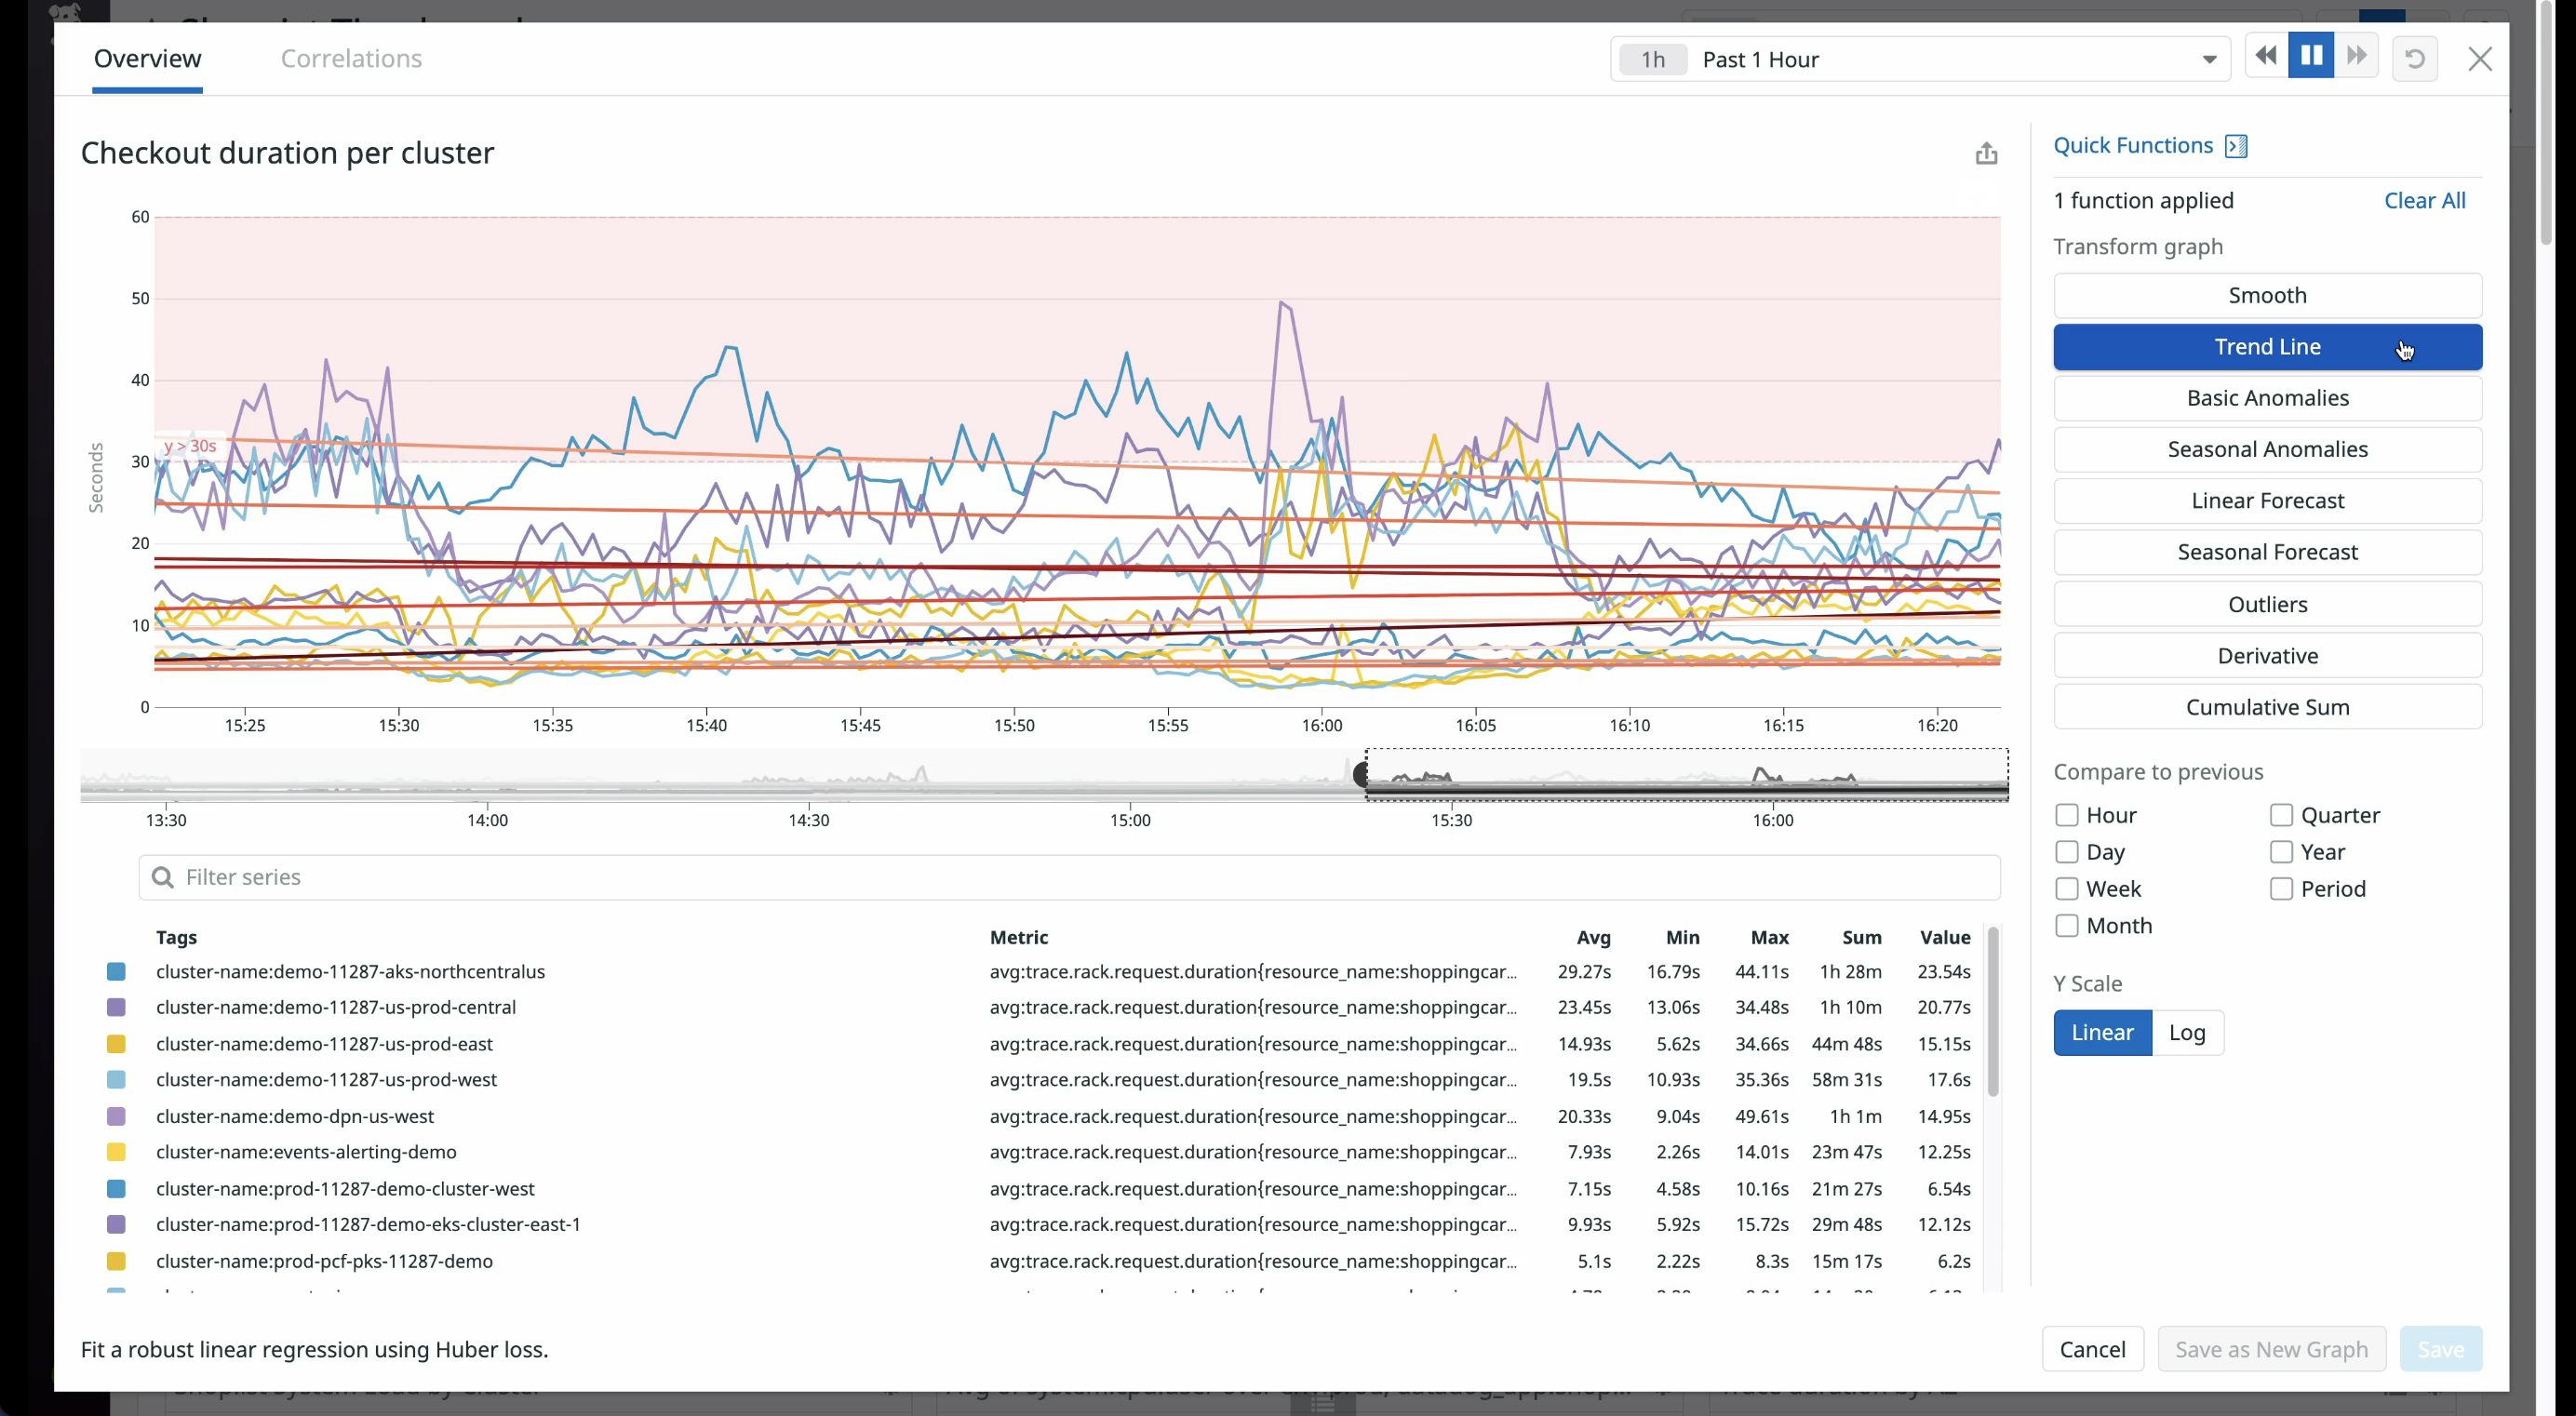 Improve data insight with correlations, custom functions, and transformations.